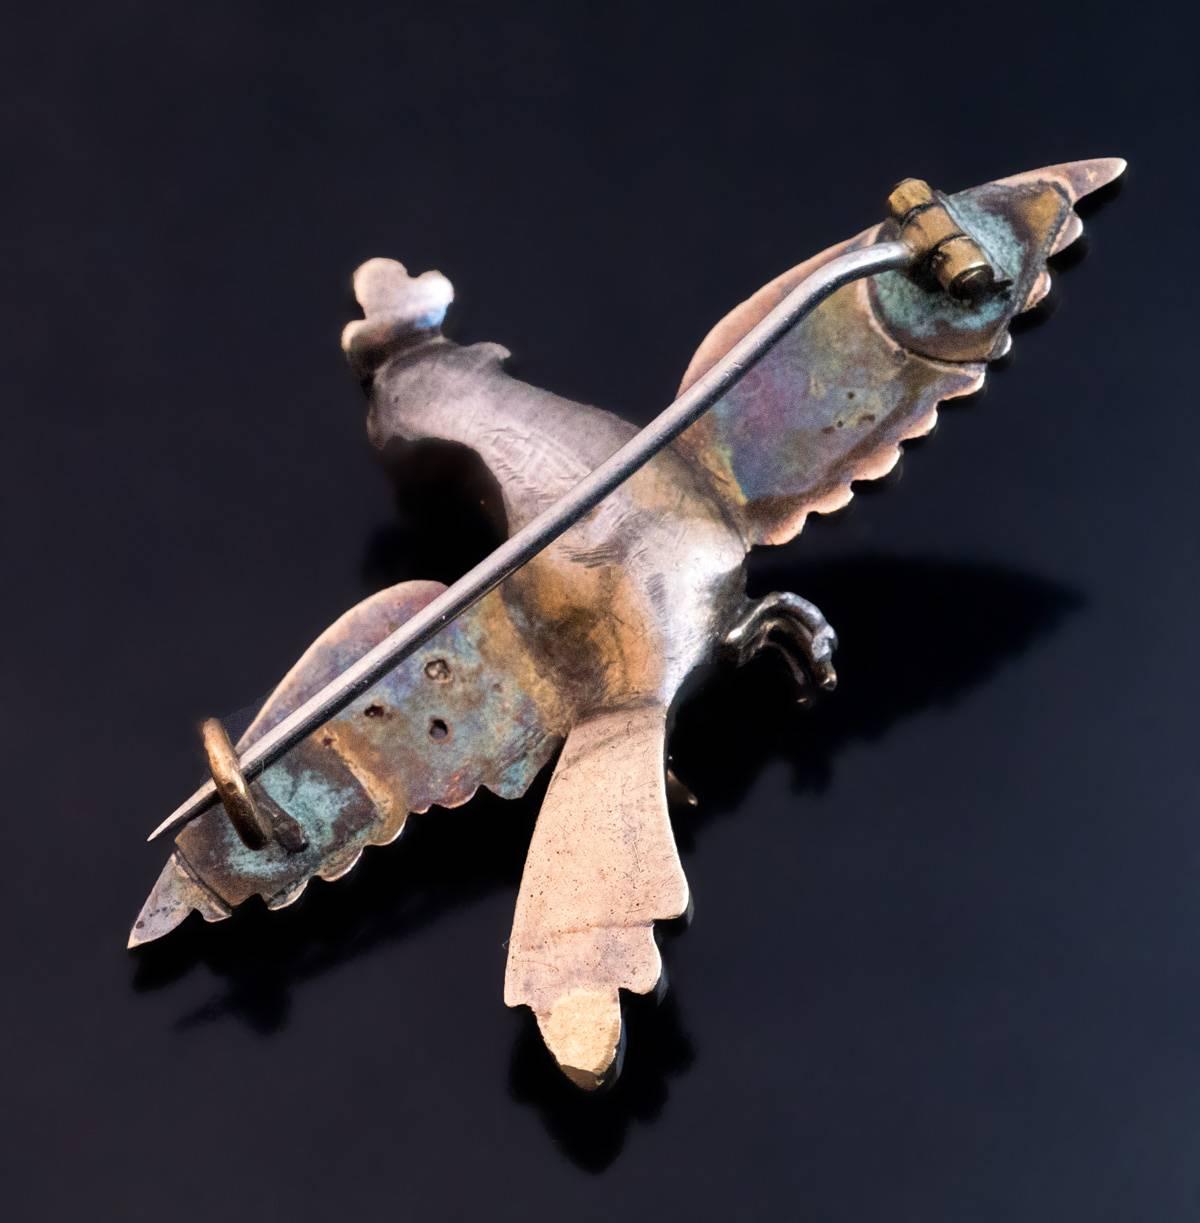 This is a very fine and extremely rare museum quality antique Georgian “bird of paradise” silver topped gold brooch from the mid 18th century. The brooch is embellished with rose cut diamonds, opaque blue enamel and red & green translucent